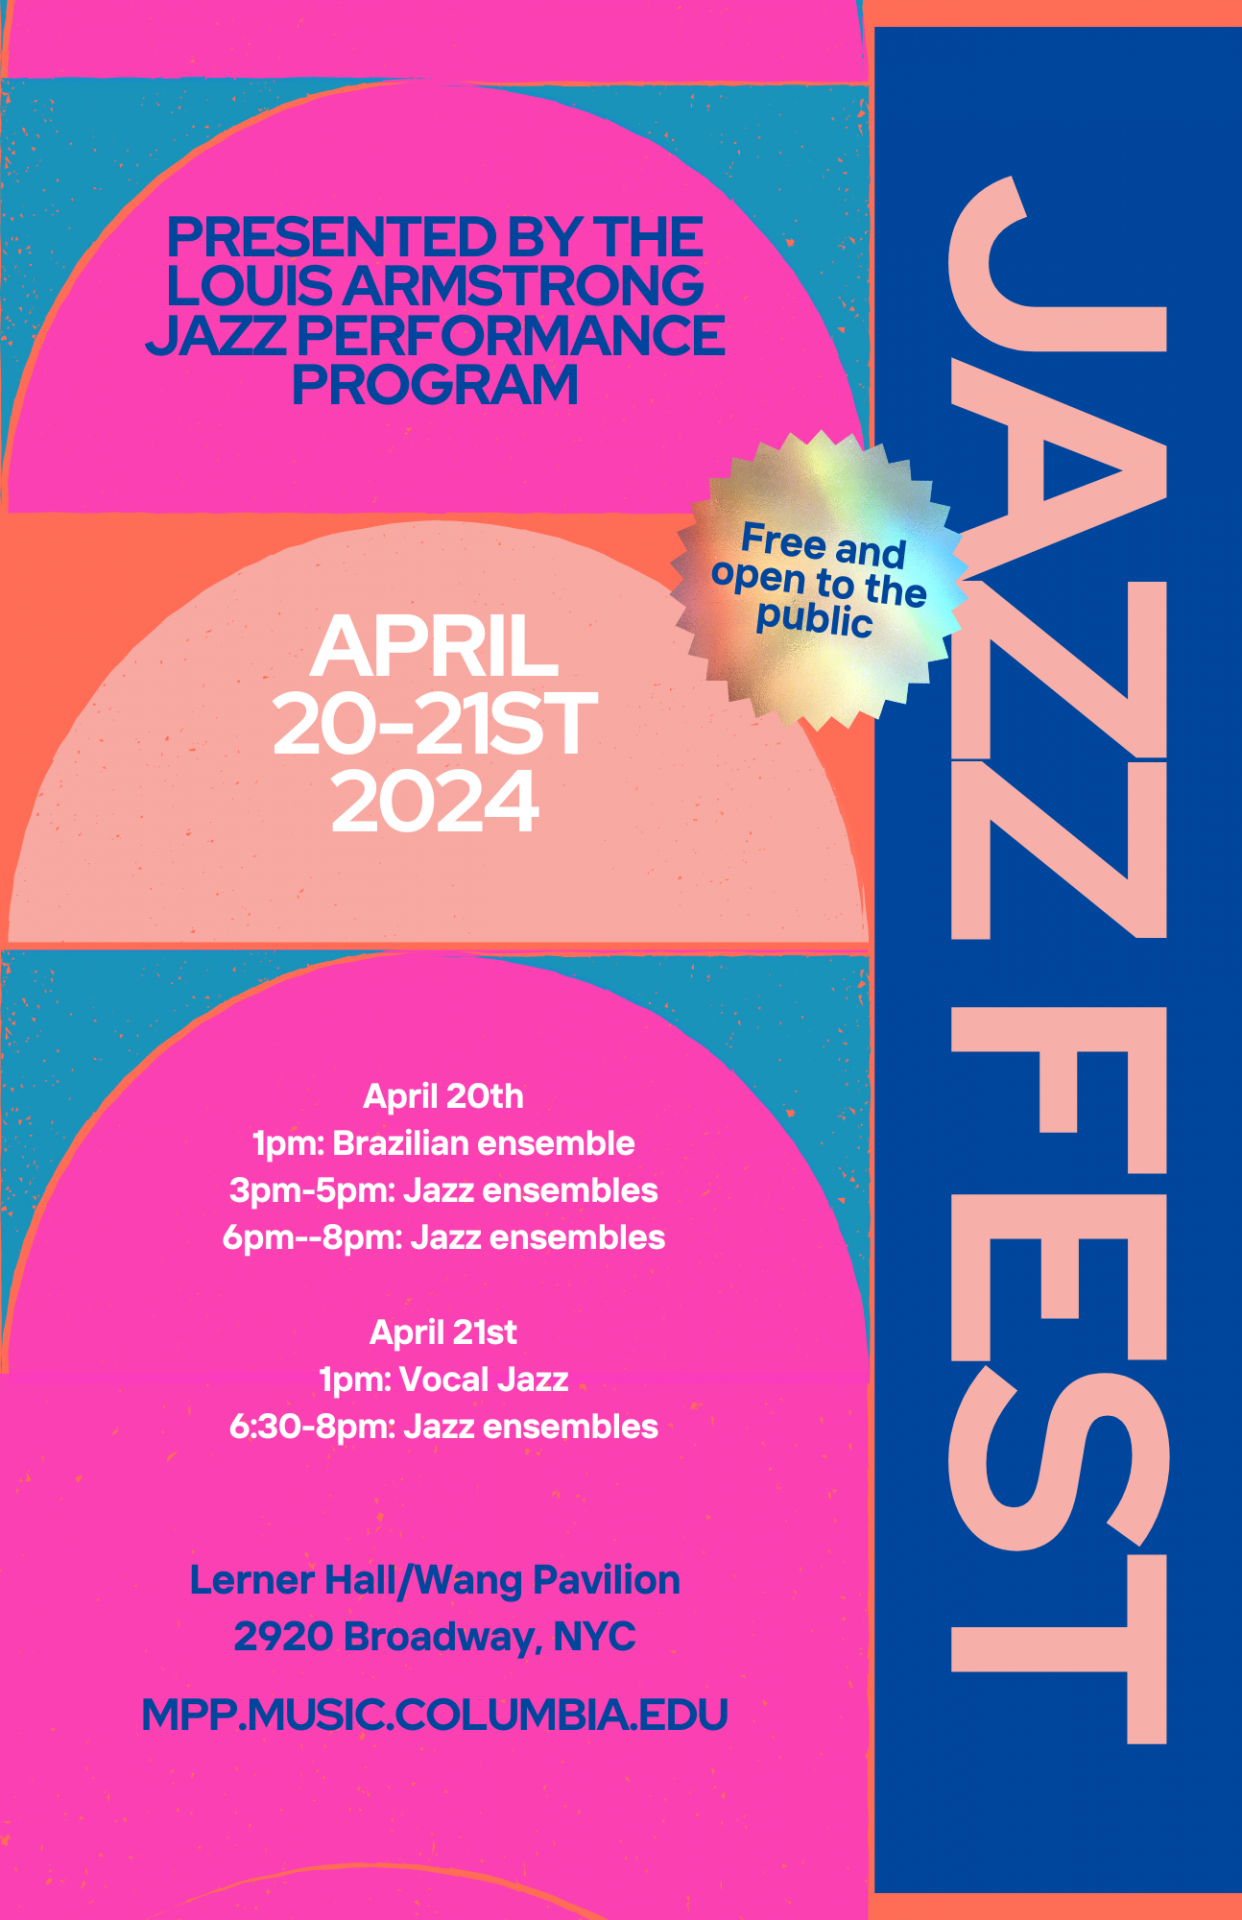 Join us on April 20th and 21st, 2024 for Spring Jazz Fest in the Wang Pavilion!  April 20th:   1pm: Brazilian Ensemble  3pm-5pm: Jazz Ensembles  6pm-8pm: Jazz Ensembles     April 21st:  1pm: Vocal Jazz  6:30pm-8pm: Jazz Ensembles     Free and open to the public!